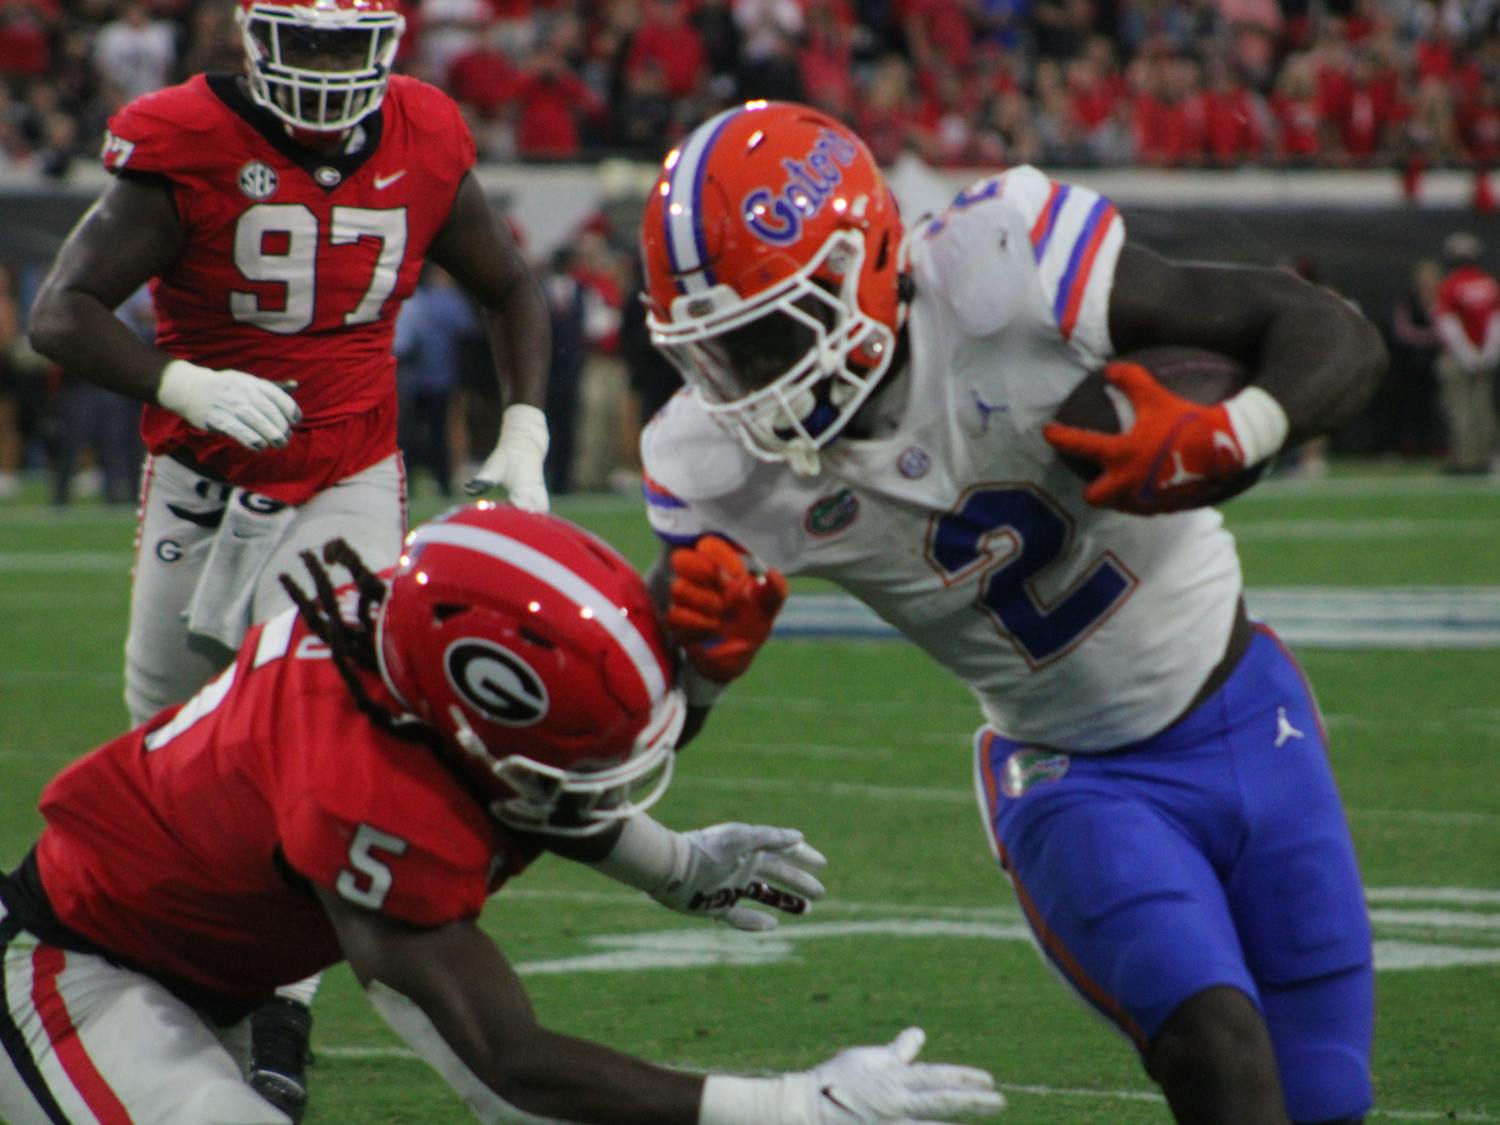 Running back Montrell Johnson Jr. runs the ball against a Georgia defender in the Gators' 42-20 loss to the Georgia Bulldogs on Saturday, Oct. 29, 2023.